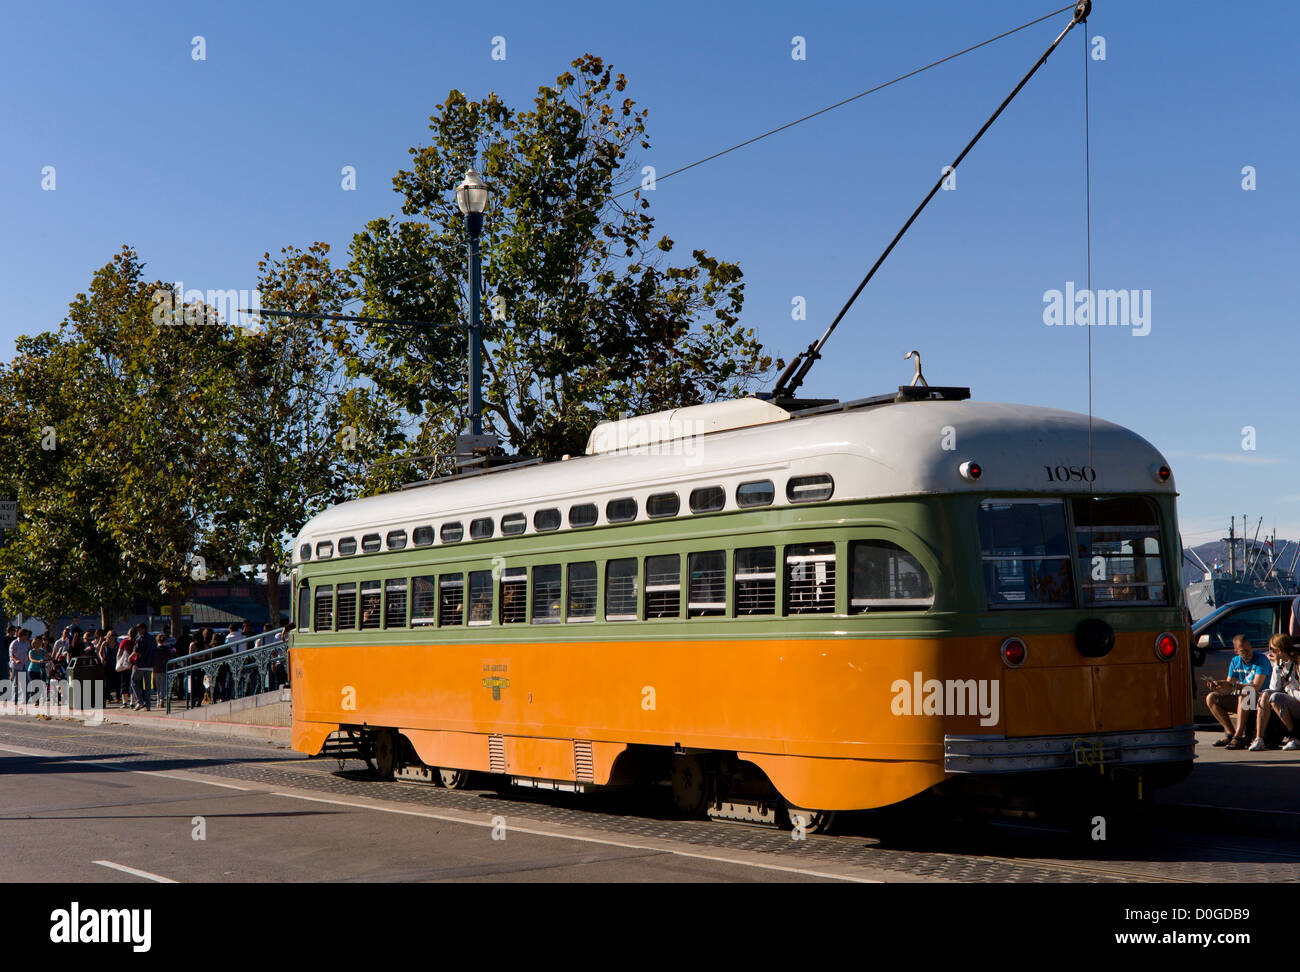 A vintage trolley car transports passengers to San Francisco's Fisherman's Wharf Stock Photo